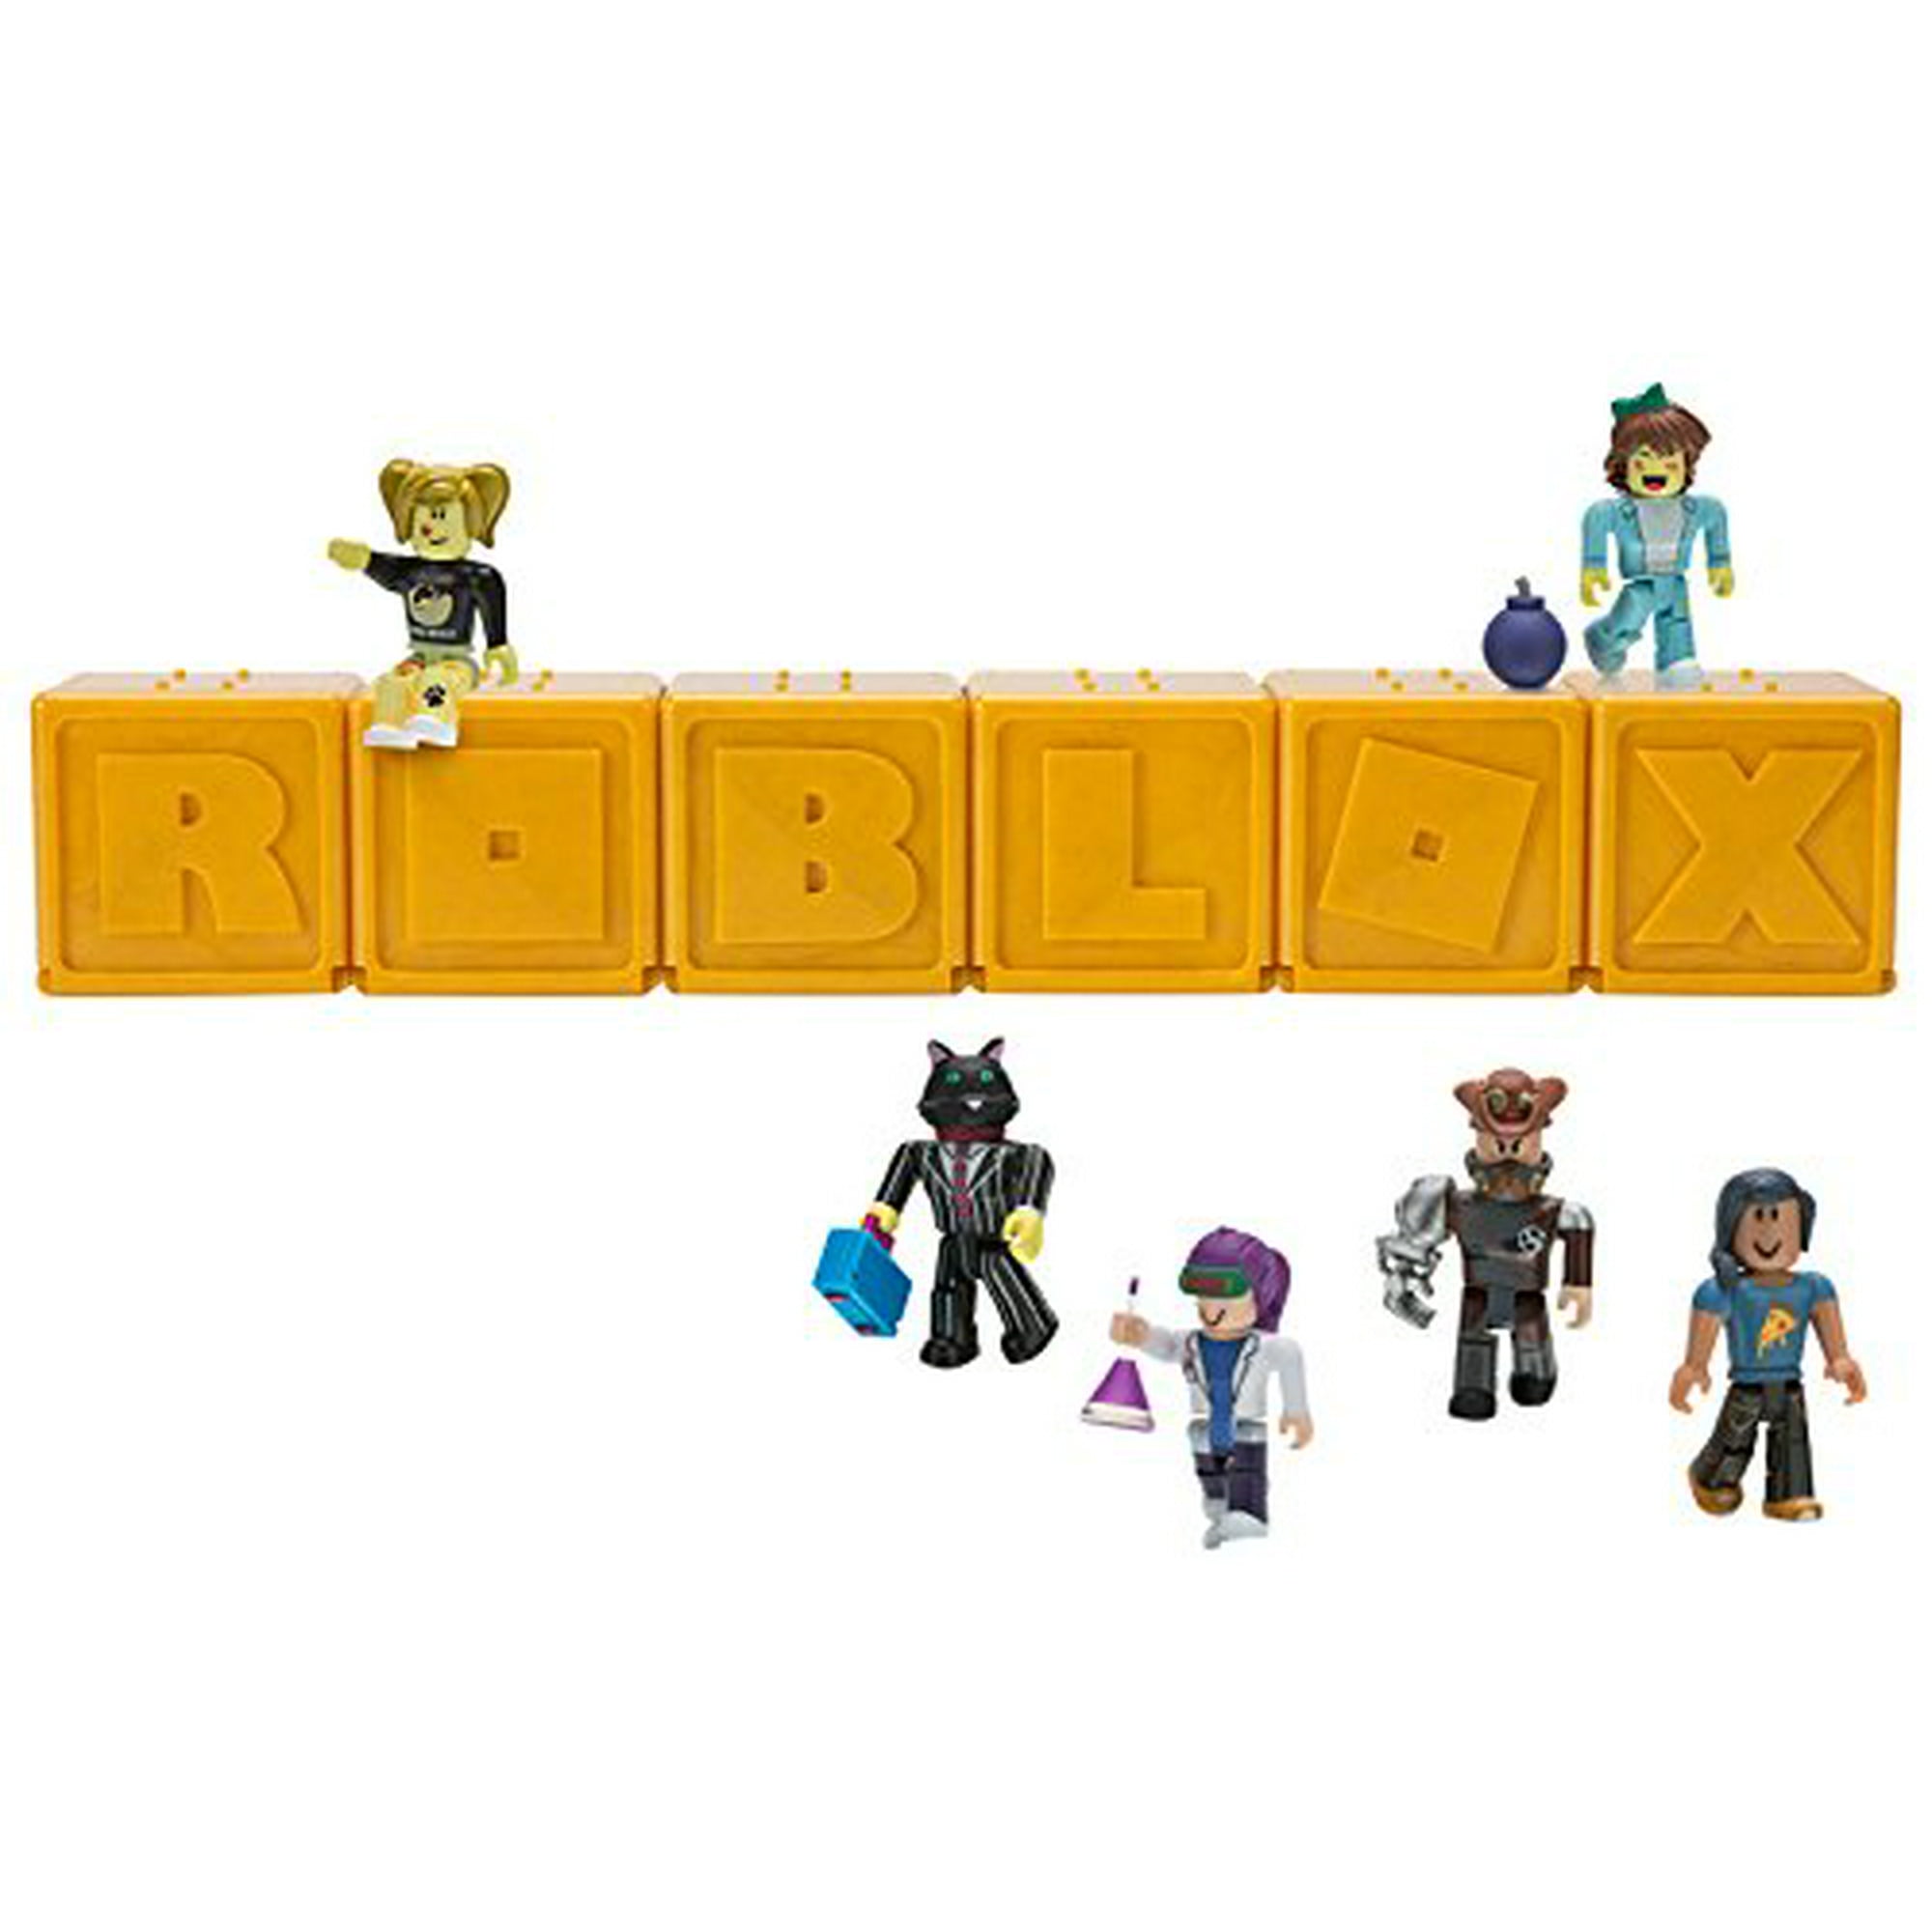 Roblox Celebrity Mystery Figure Series 1 Polybag Of 6 Action Figures Walmart Canada - roblox series 1 mystery figure styles may vary